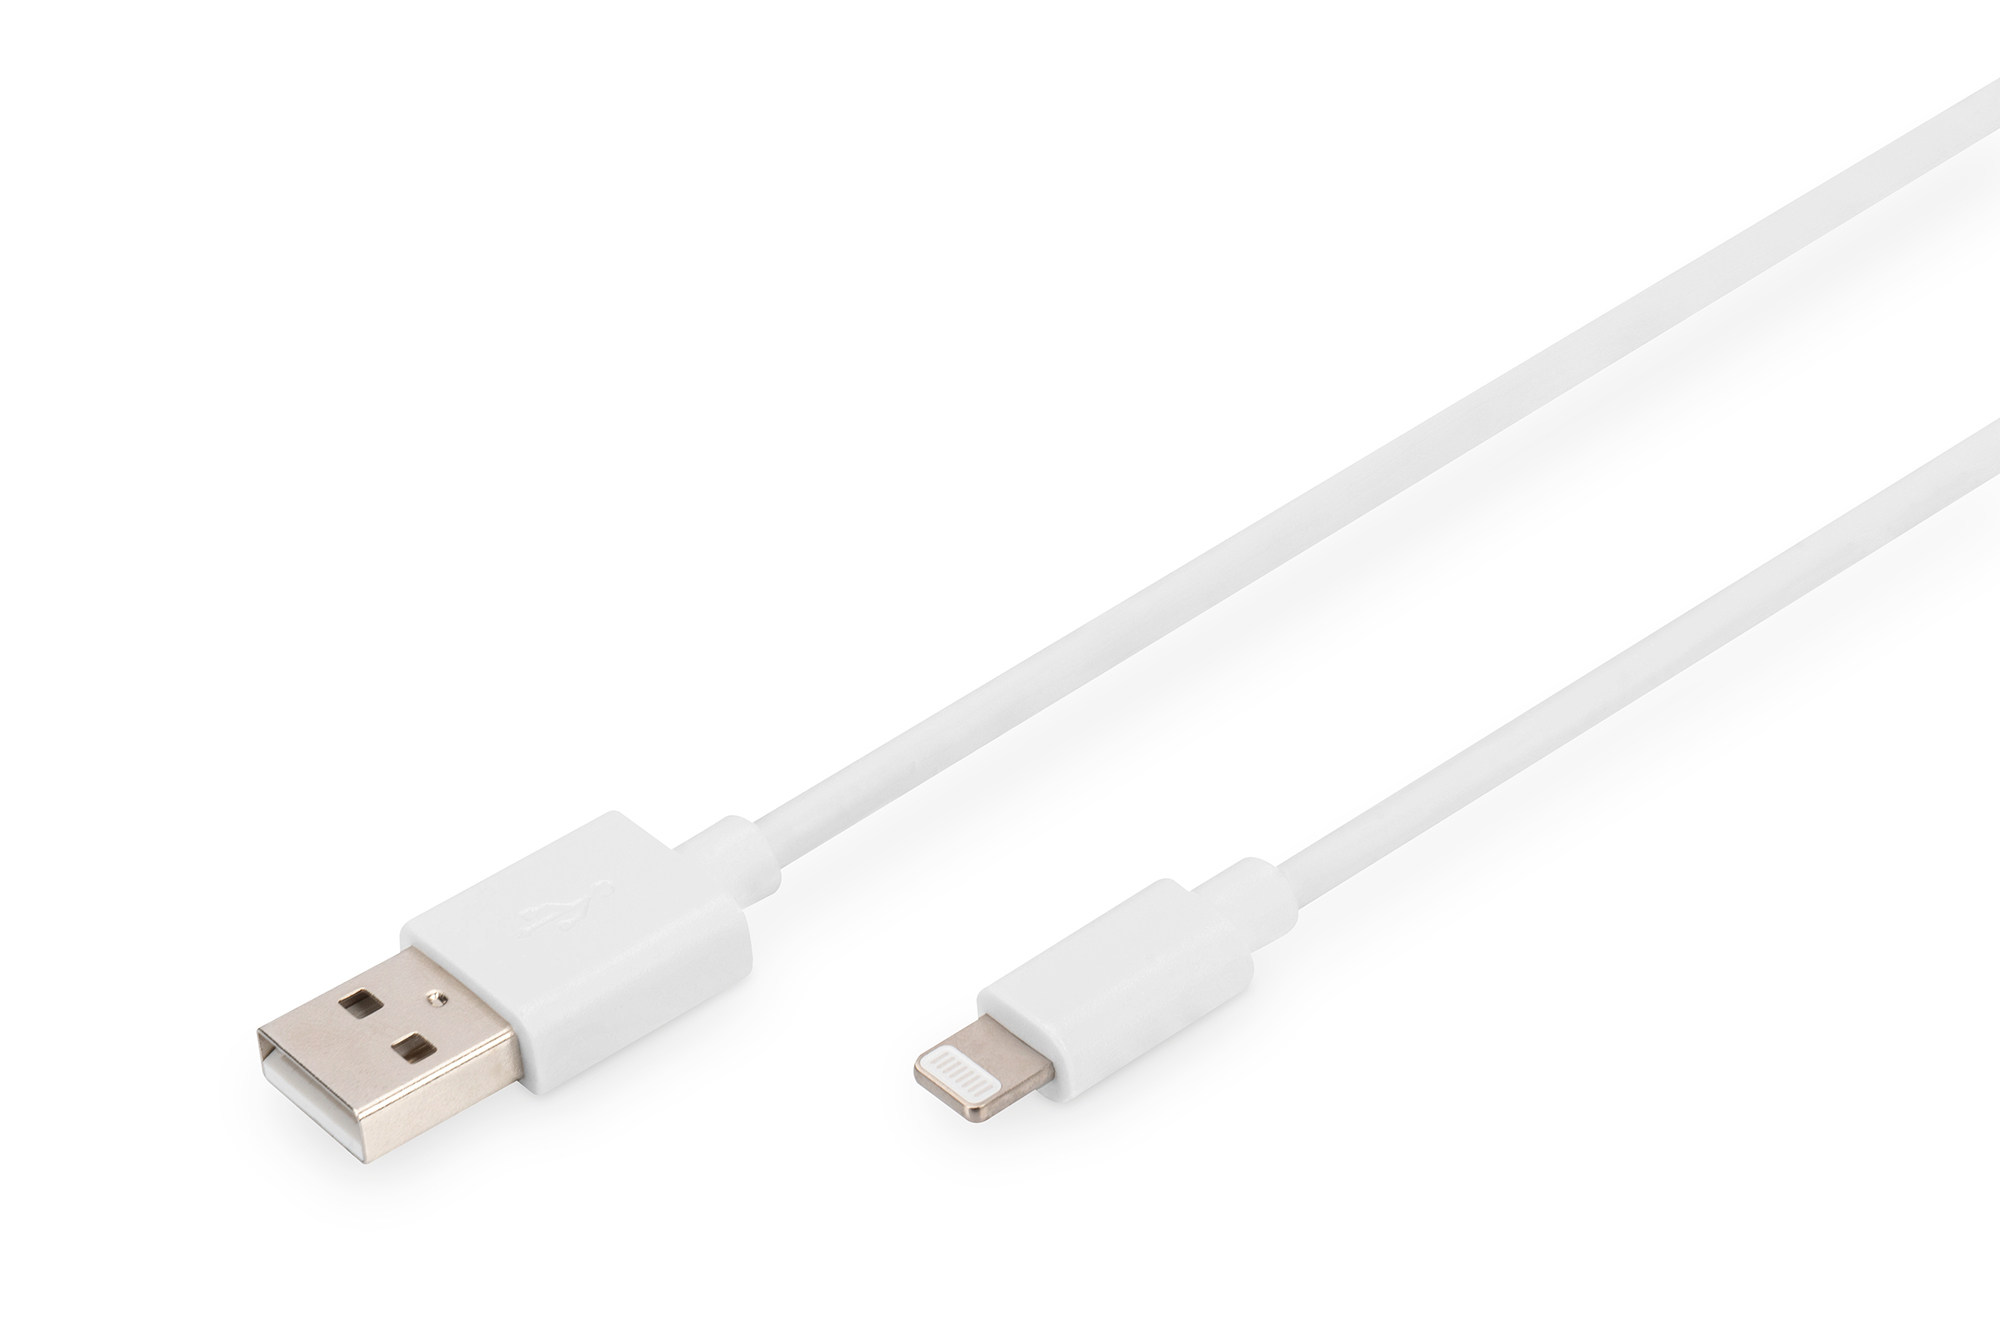 Photos - Cable (video, audio, USB) Digitus Lightning to USB-A data/charging cable, MFI-certified DB-600106-02 